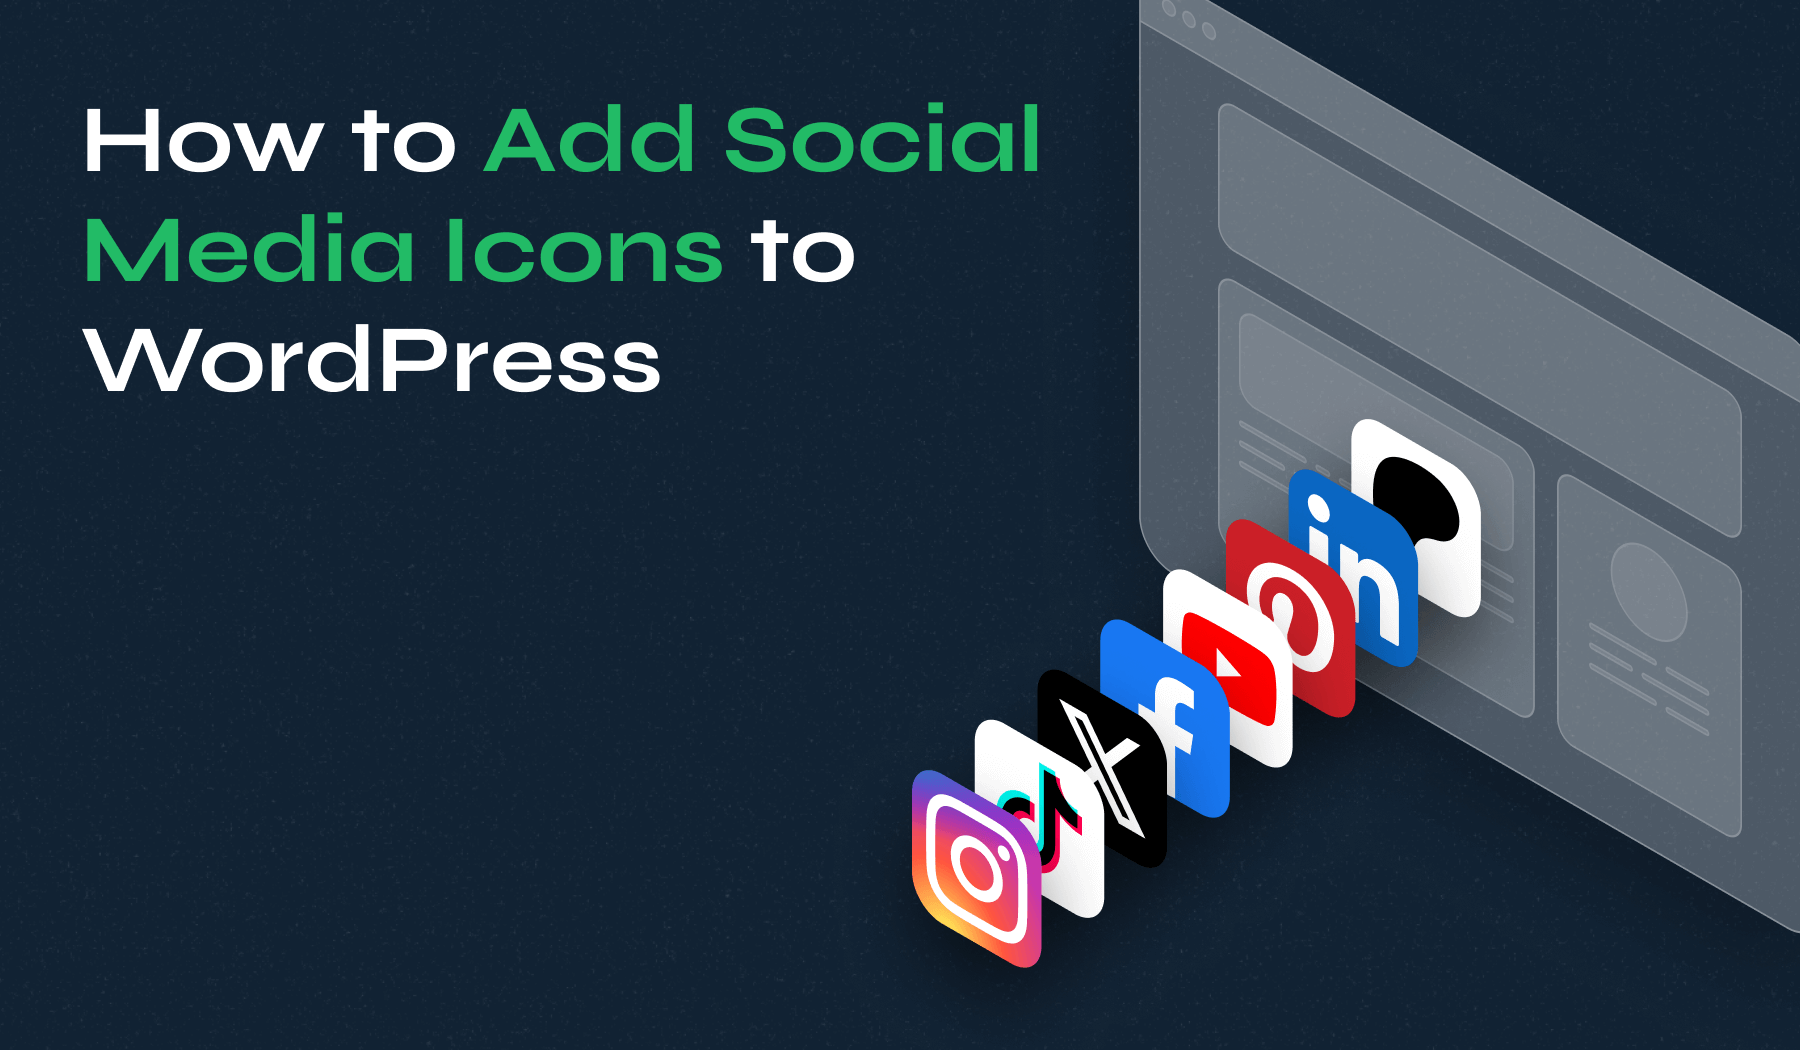 How to Add Social Media Icons to WordPress